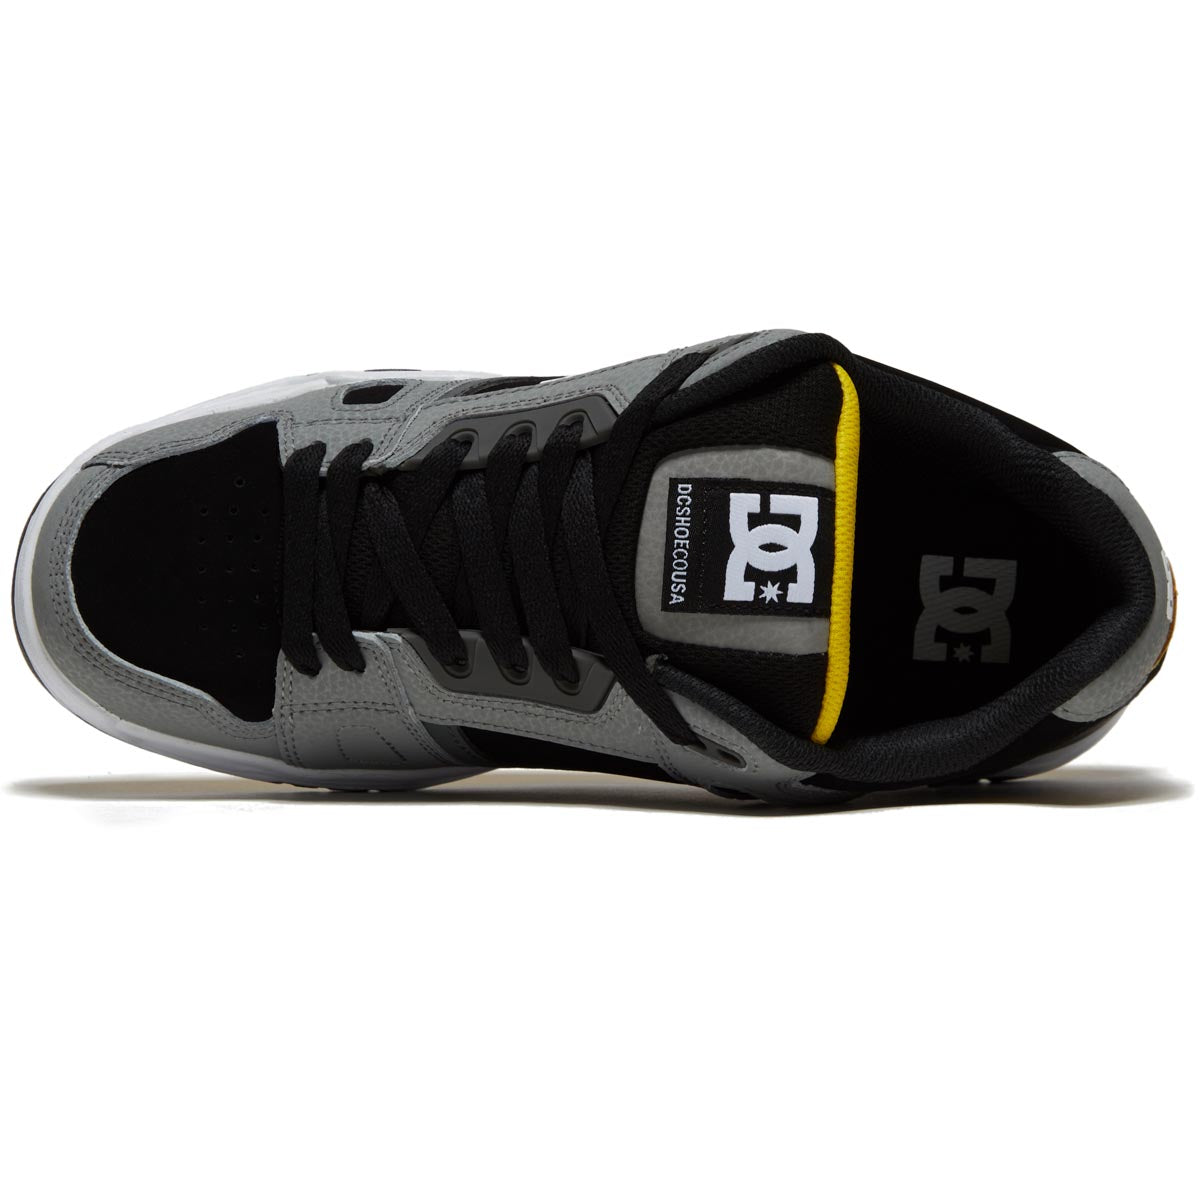 DC Stag Shoes - Grey/Yellow image 3